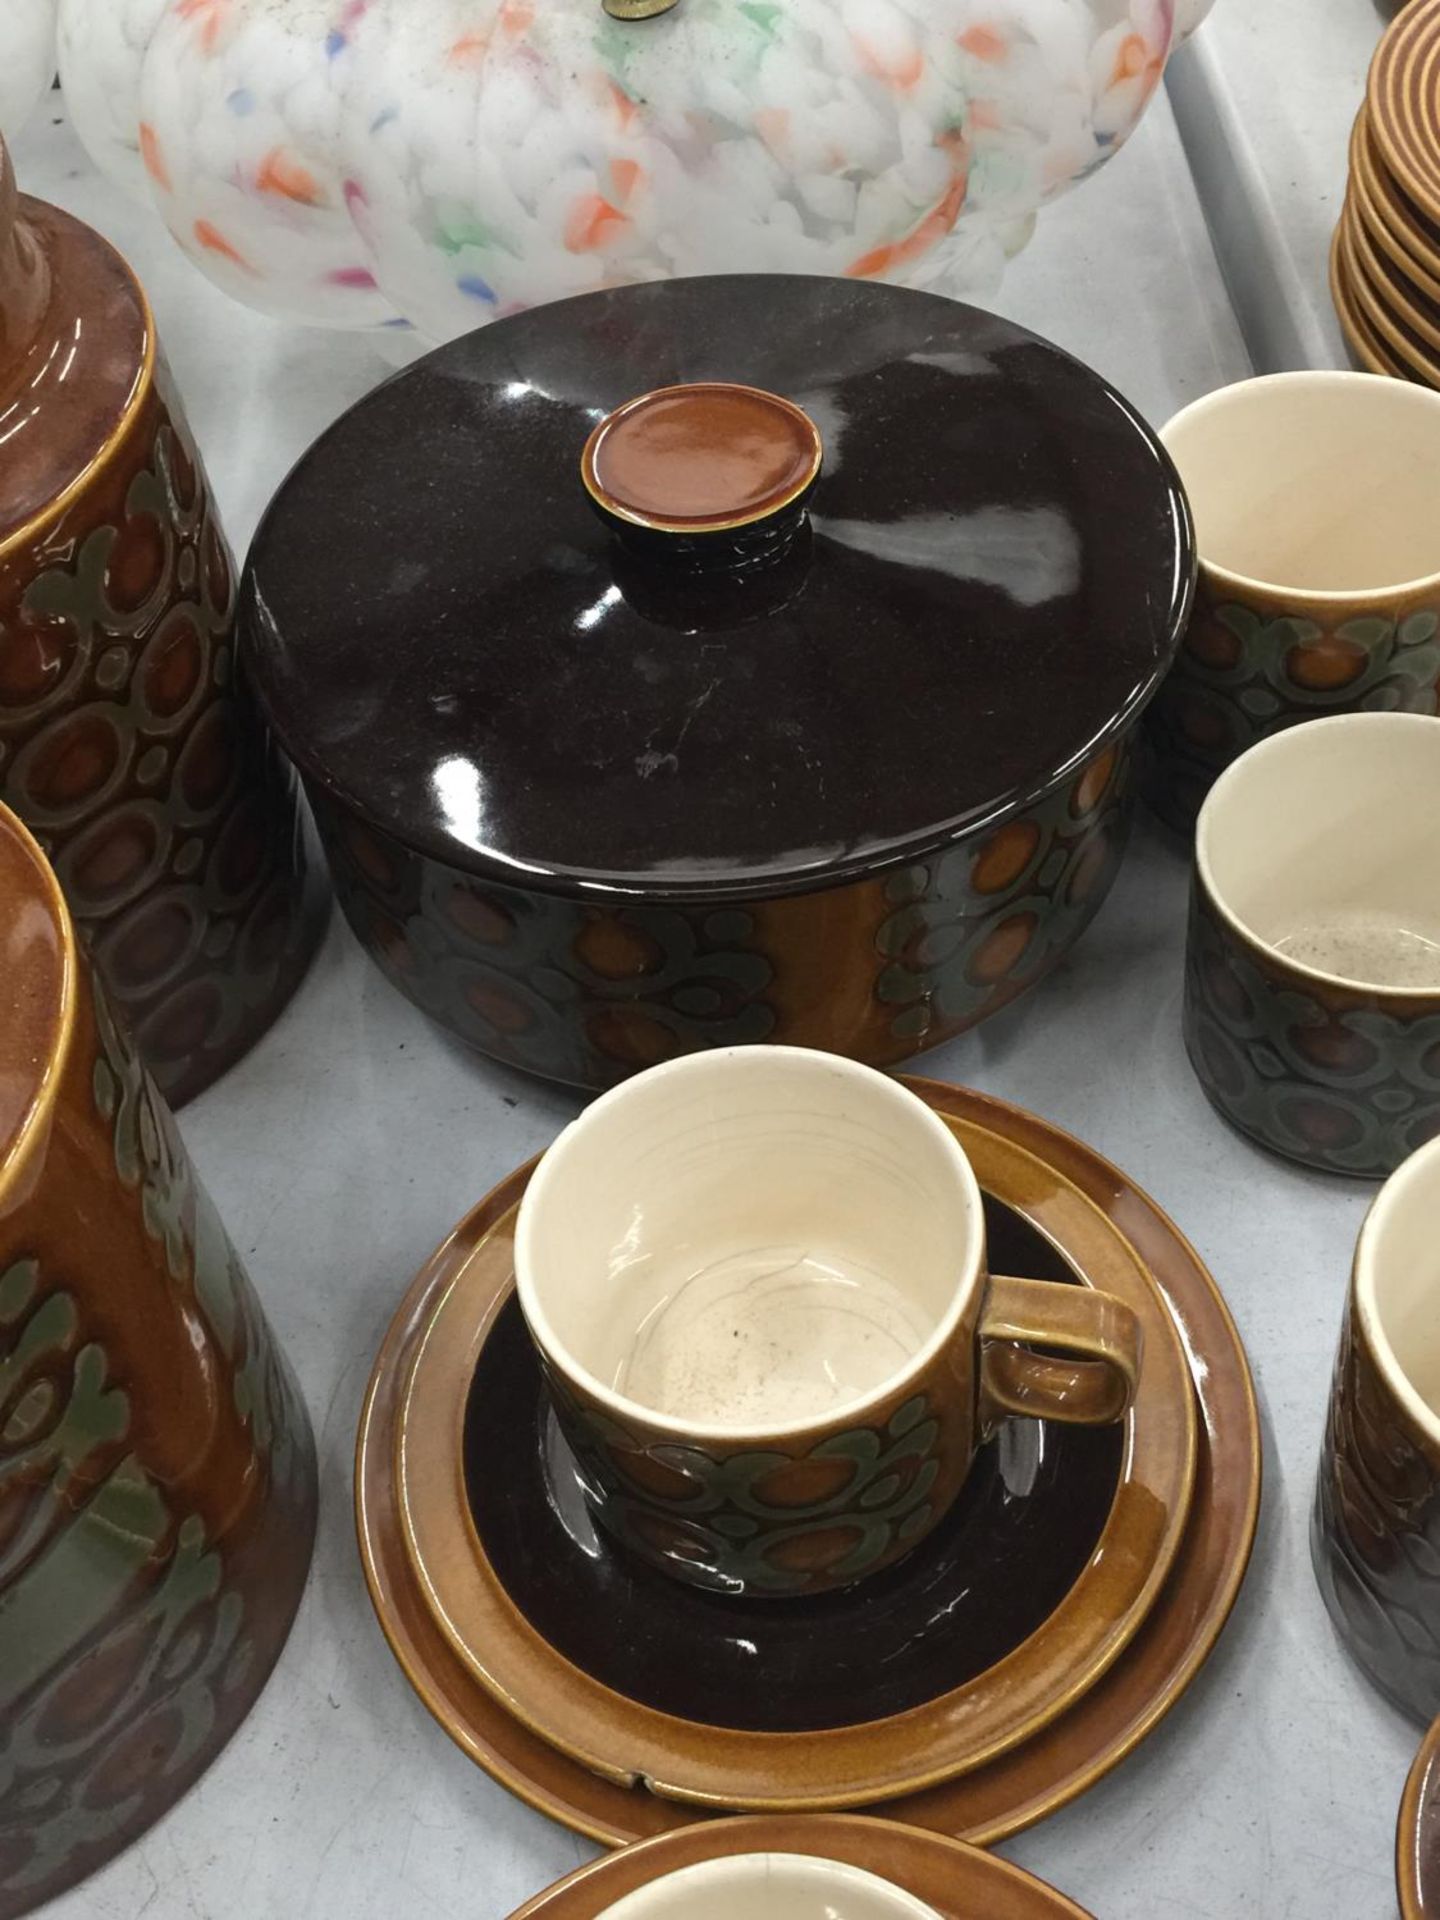 A QUANTITY OF HORNSEA POTTERY 'BRONTE' TO INCLUDE STORAGE JARS, TUREEN, CUPS, SAUCERS, JUGS, SUGAR - Image 5 of 7